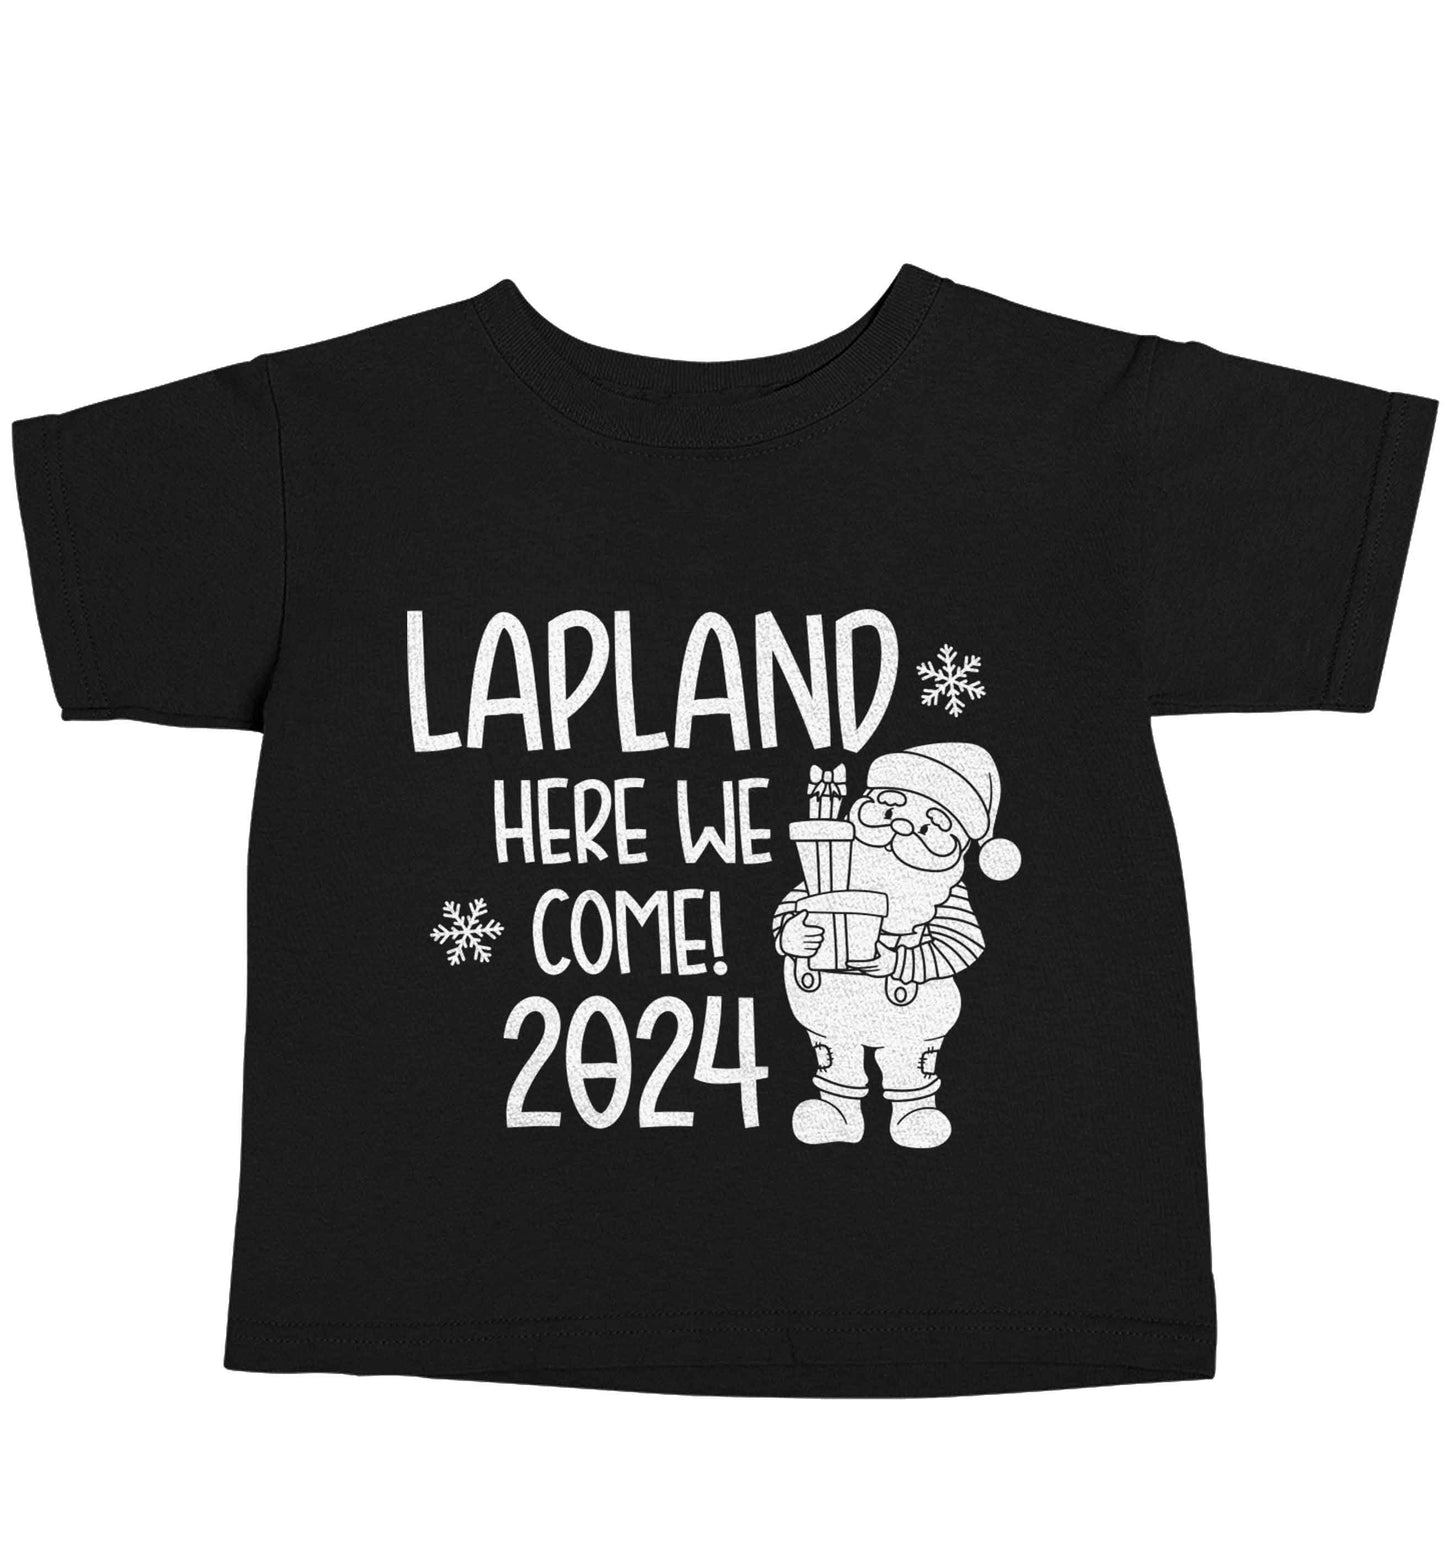 Lapland here we come Black baby toddler Tshirt 2 years